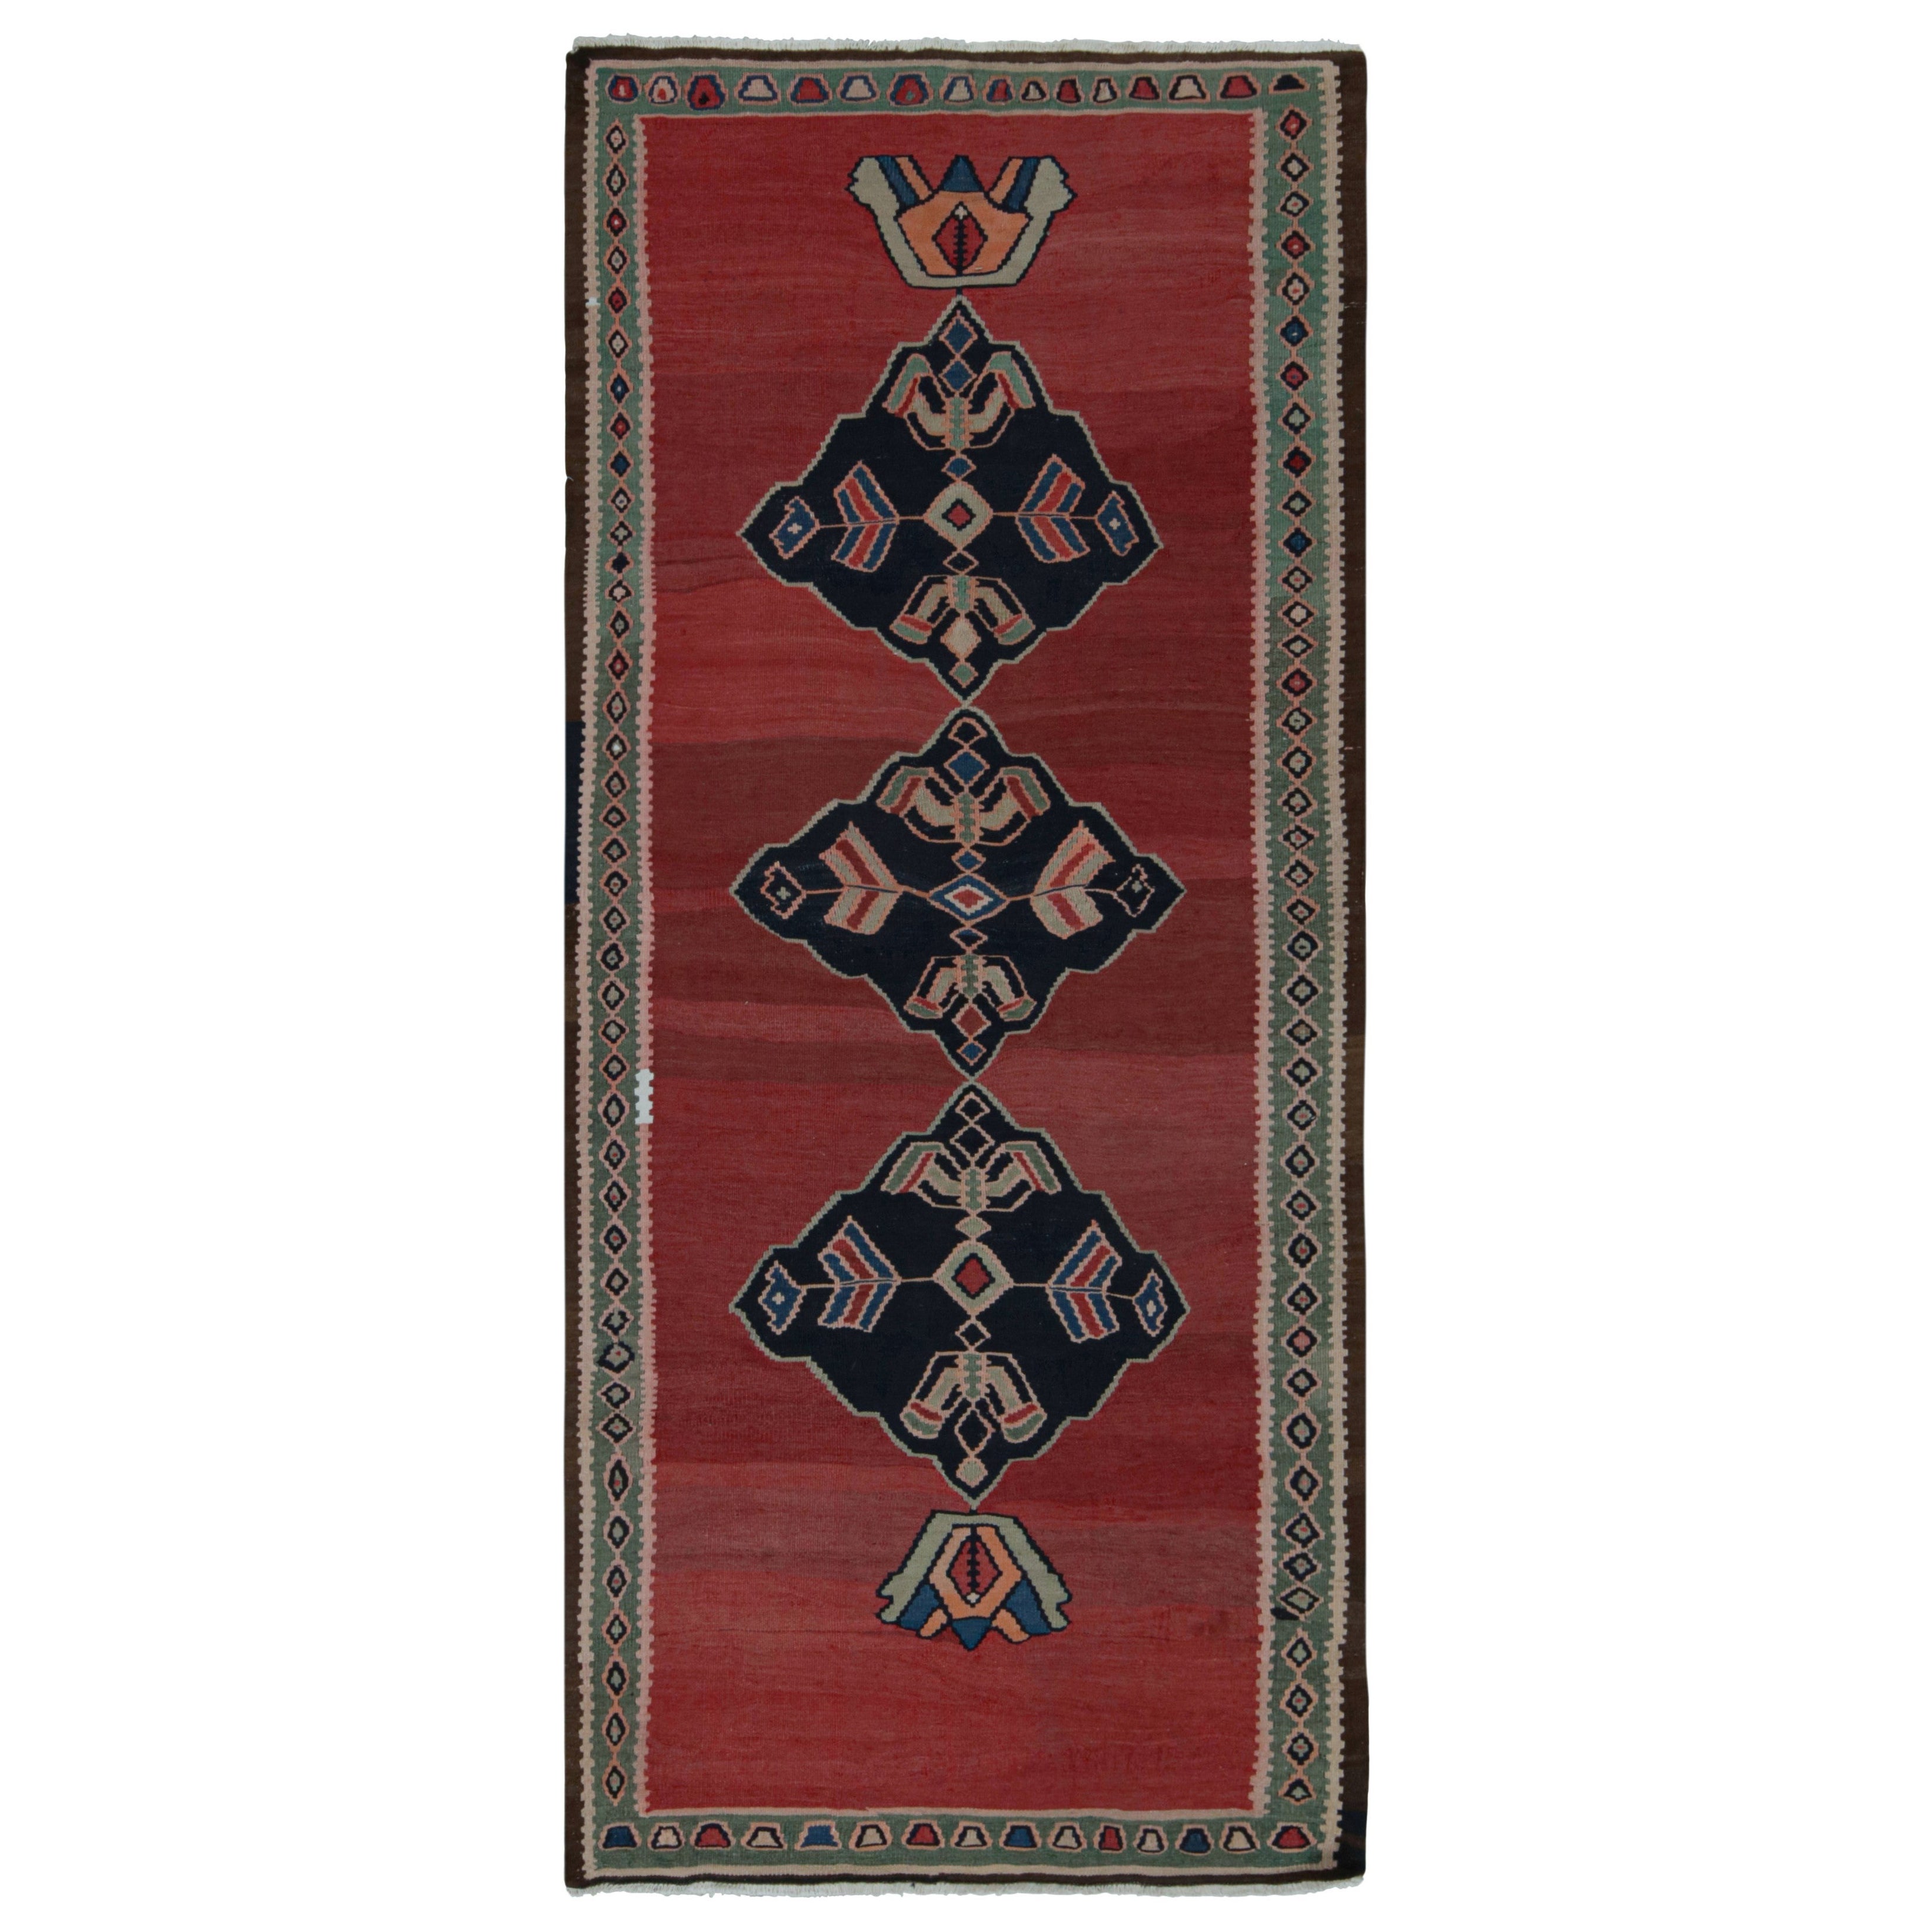 Vintage Afghani tribal Kilim rug with Open Field and Medallions from Rug & Kilim For Sale